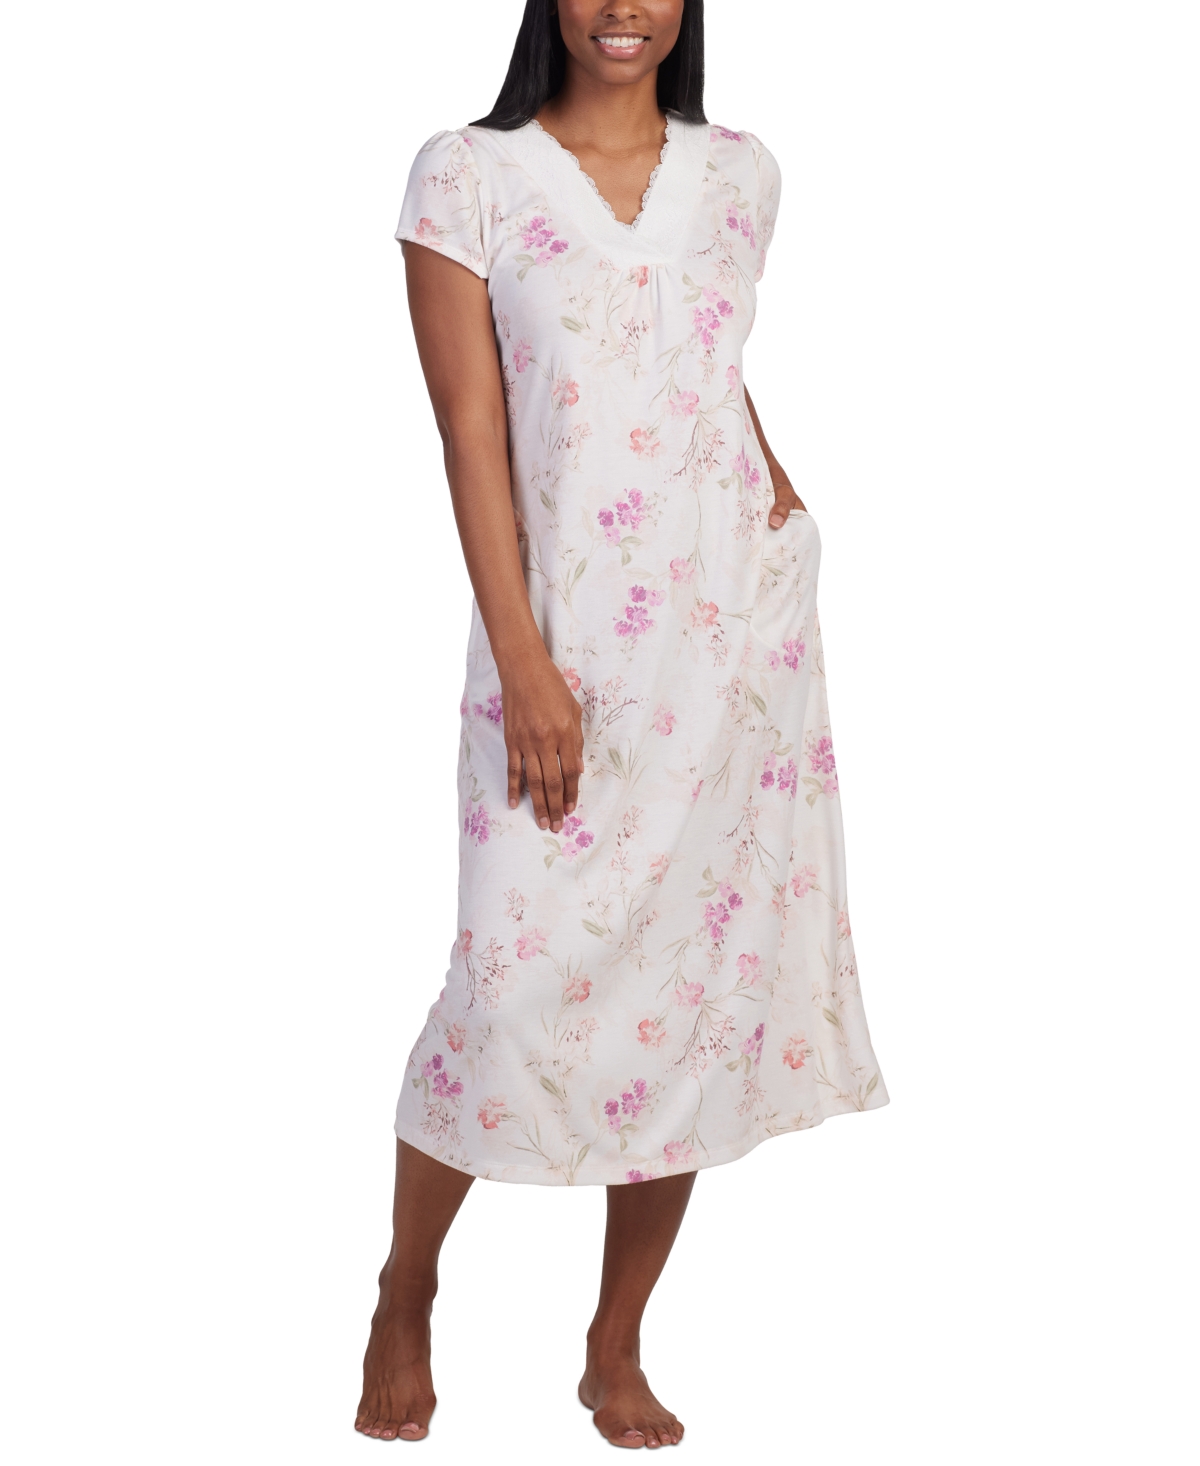 Women's Floral Cap-Sleeve Lace-Trim Nightgown - Pink Orchid